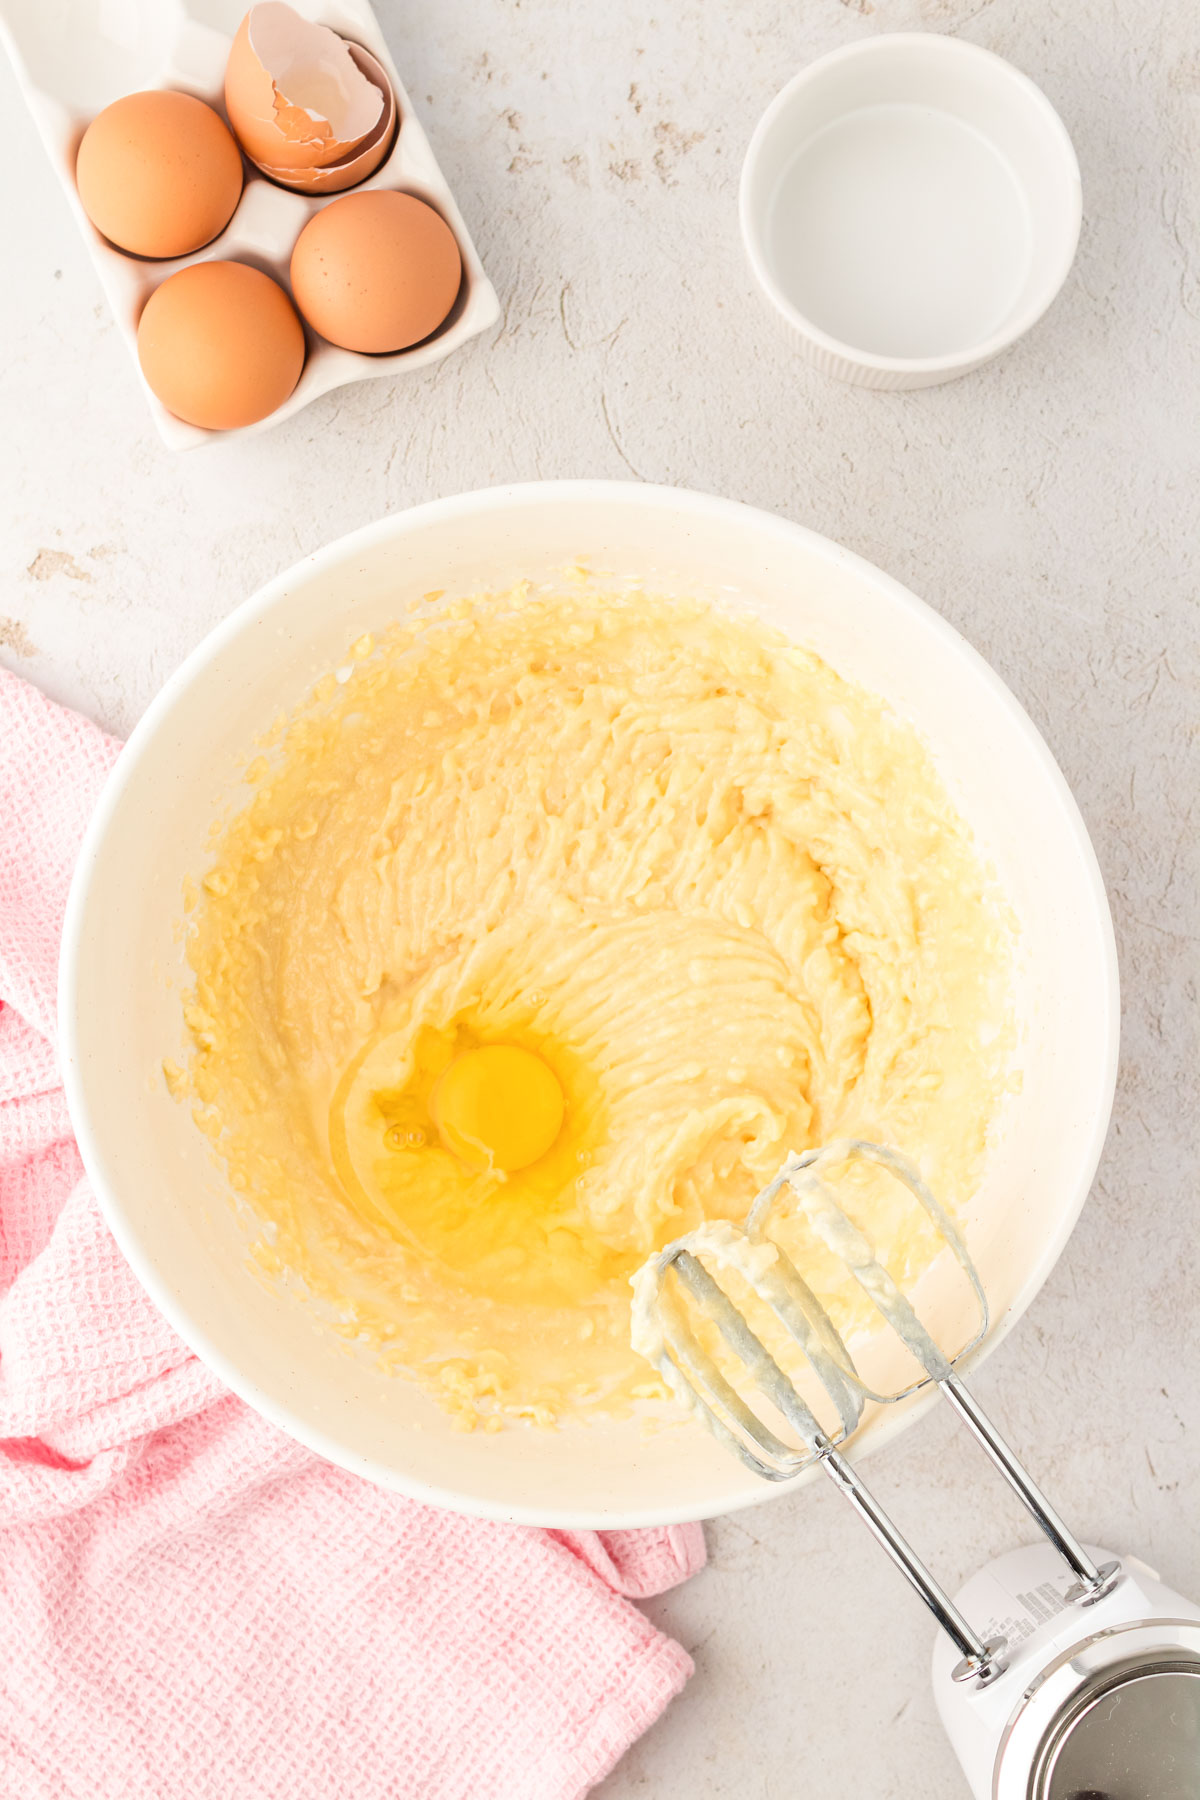 Egg being added to yellow cake mix.